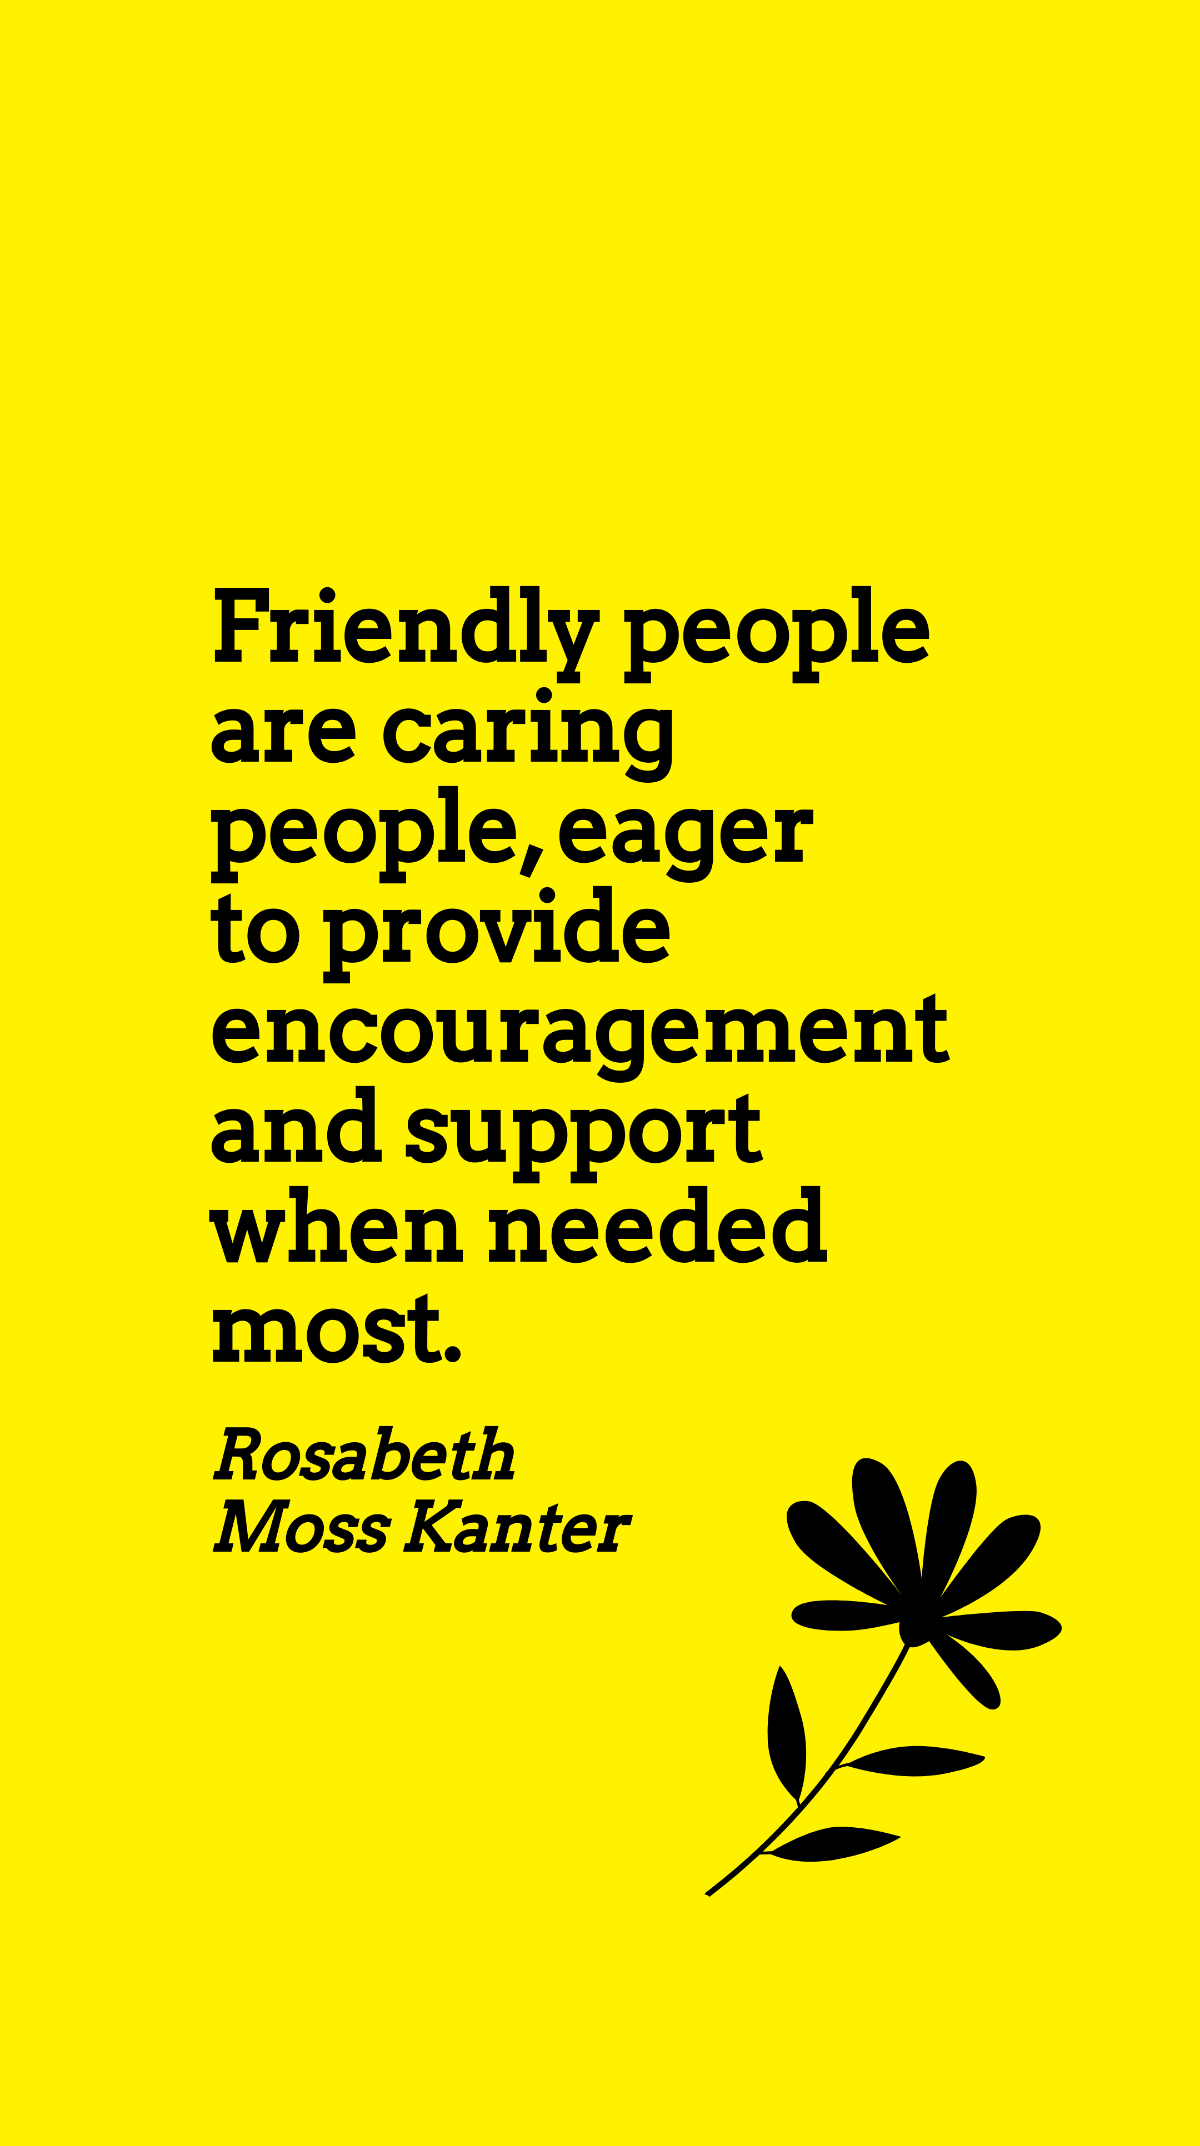 Free Rosabeth Moss Kanter - Friendly people are caring people, eager to provide encouragement and support when needed most. Template